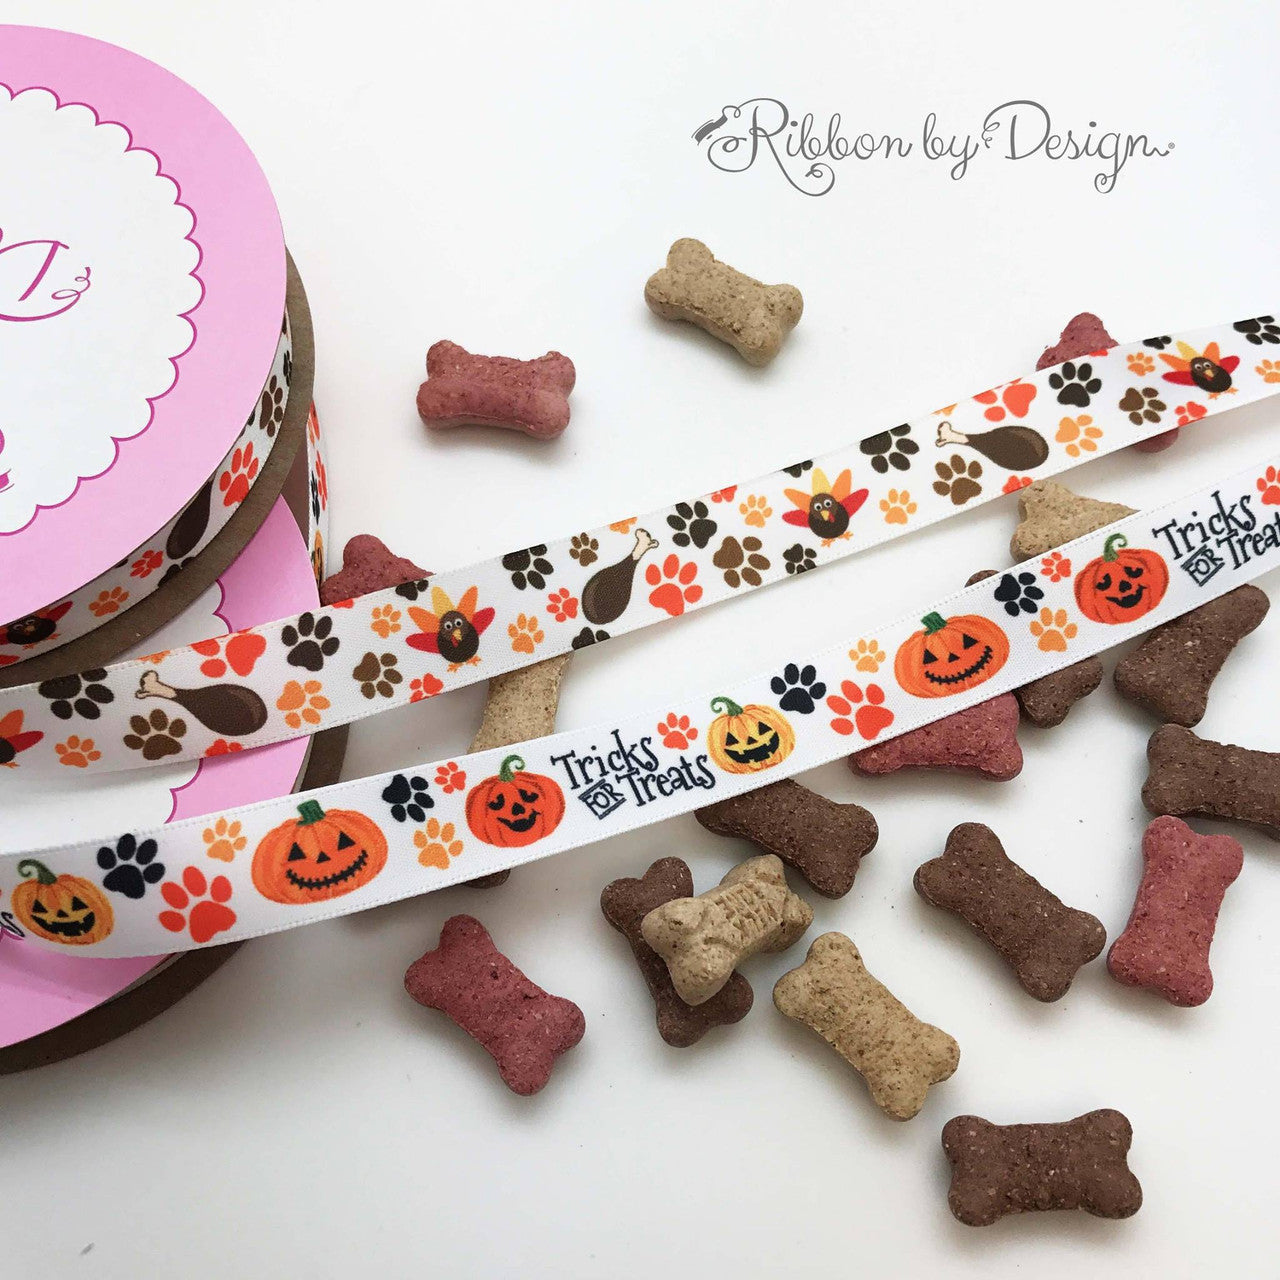 Tricks for Treats ribbon with paw prints and Jack O' Lanterns for pets printed  on 5/8" white single face satin